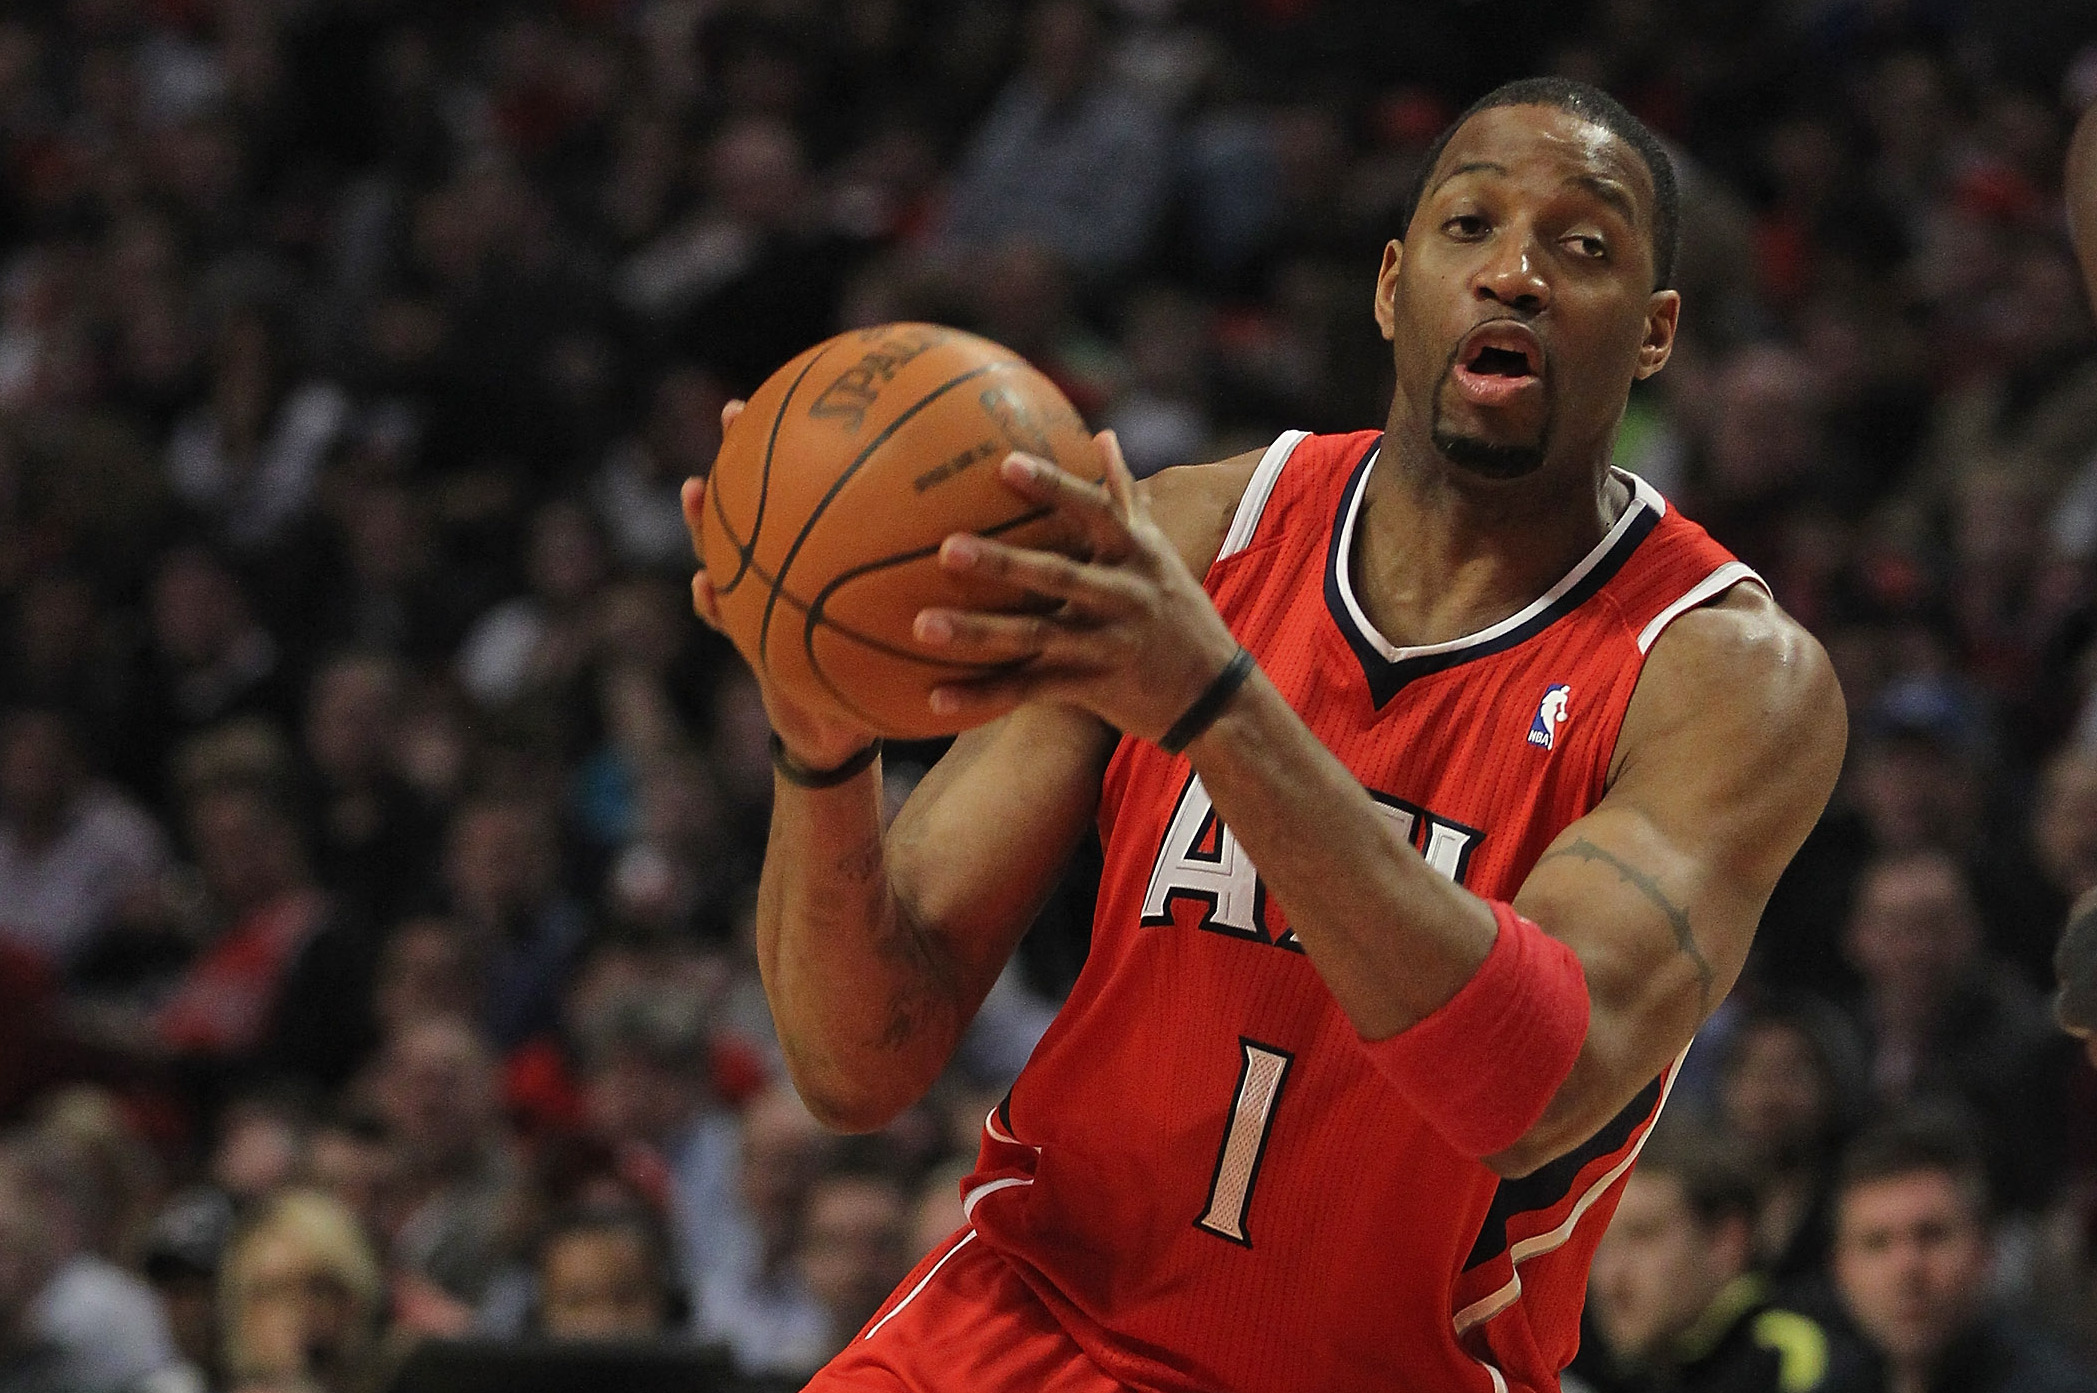 Tracy McGrady takes his talents to China